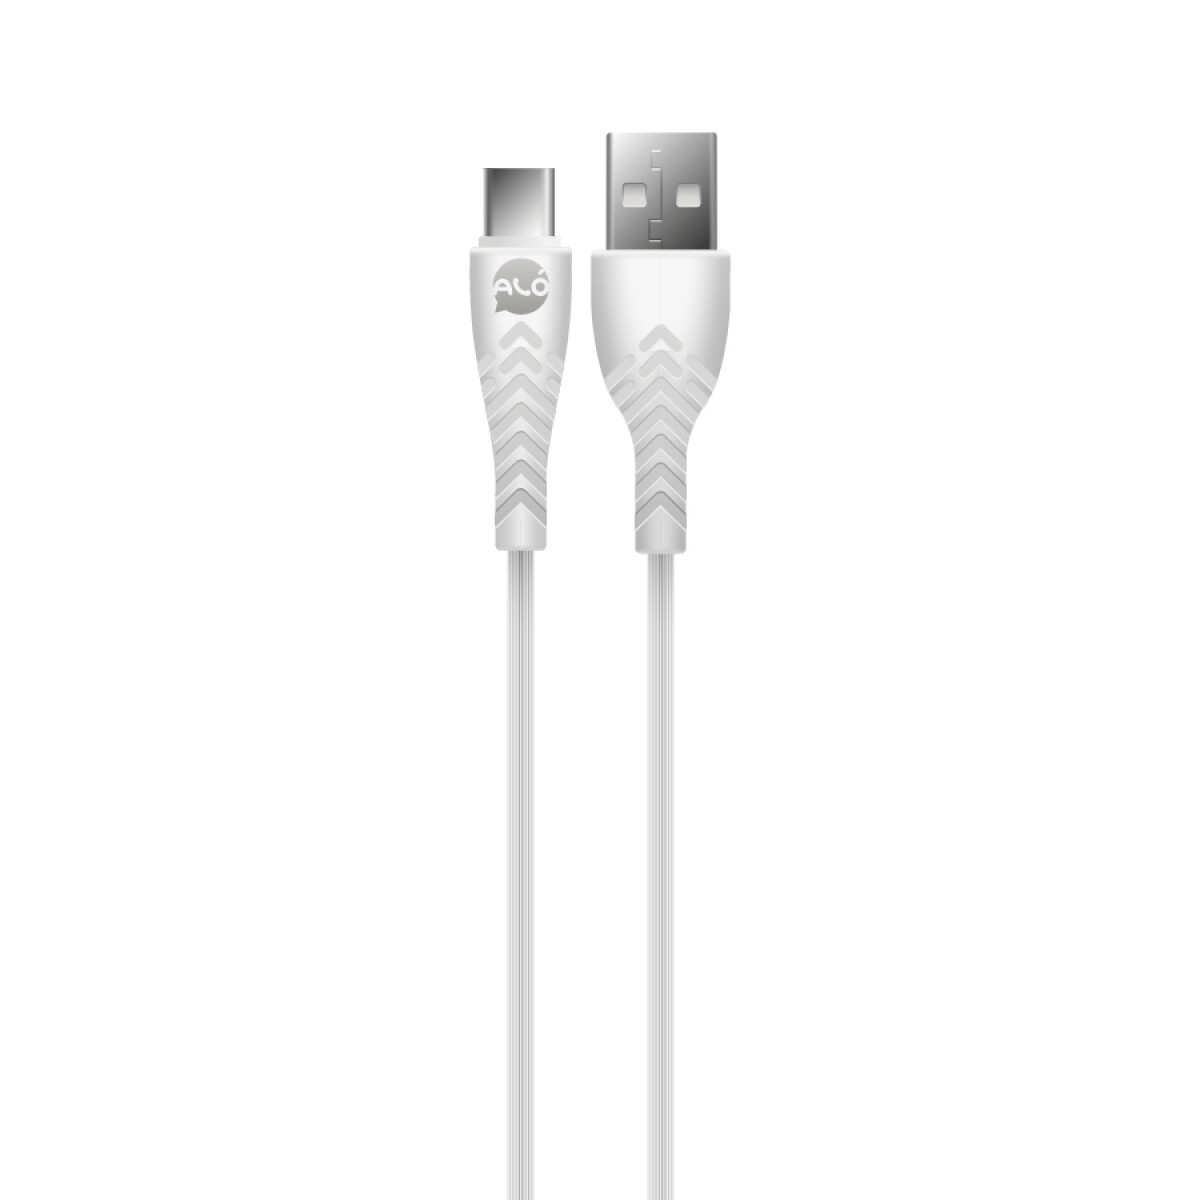 Cable USB A - TYPE-C 3.1A 1m ALO FLASH - White 